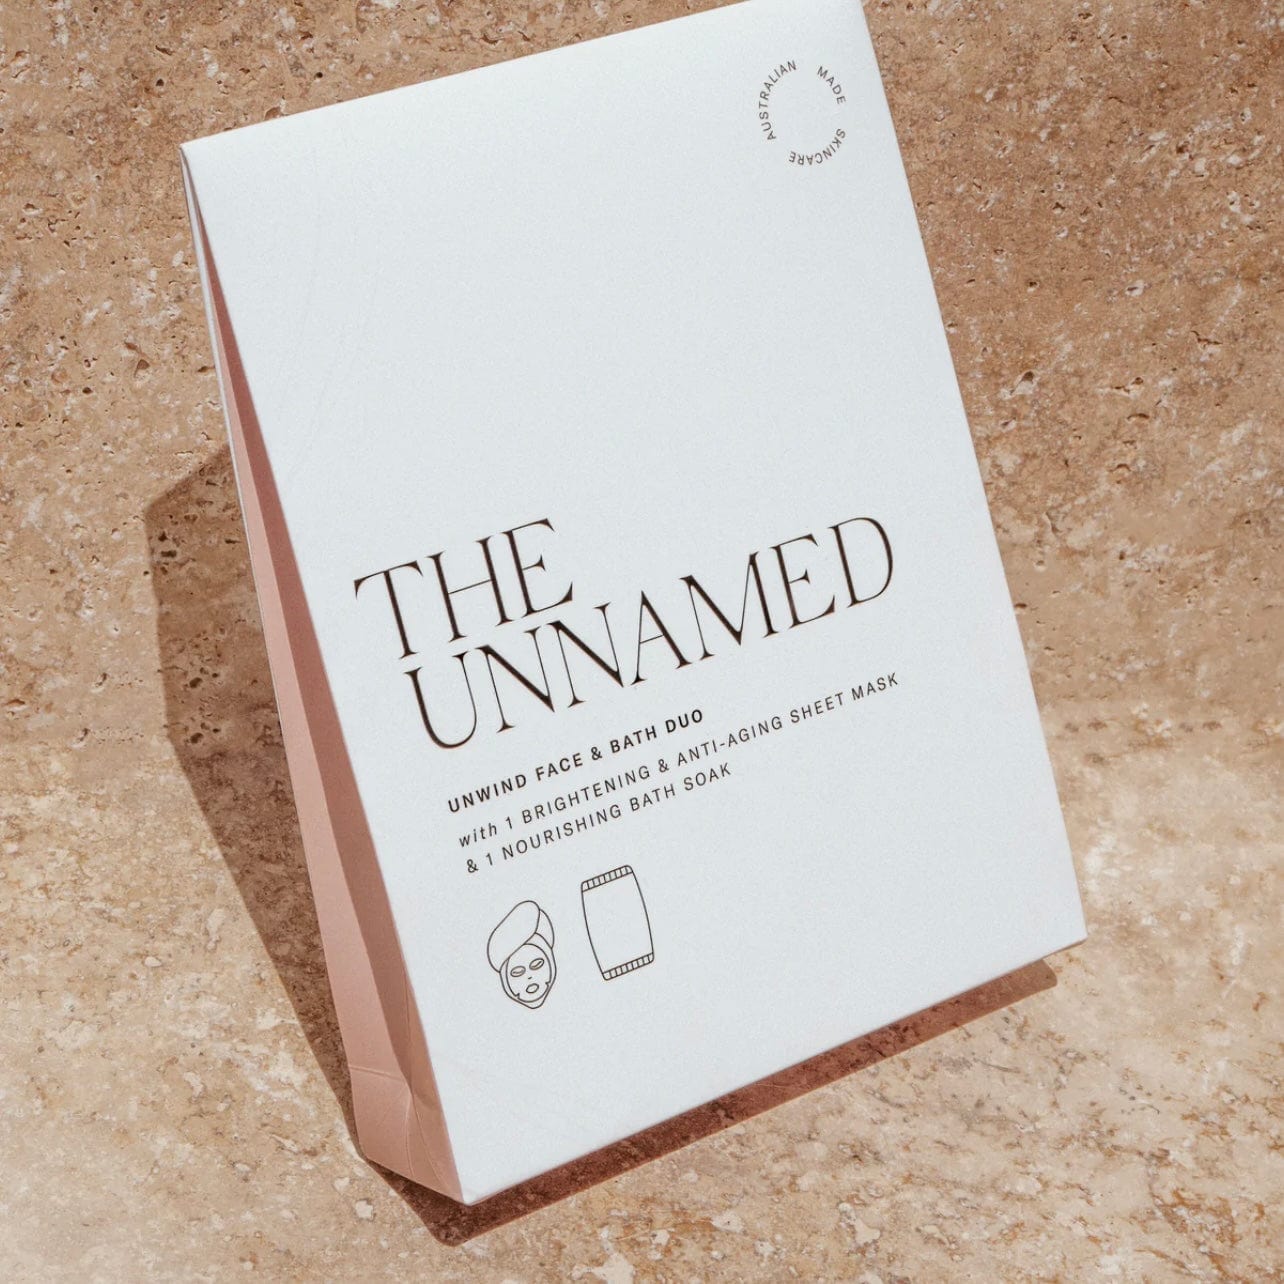 Unwind Face & Bath Duo Set by The Unnamed